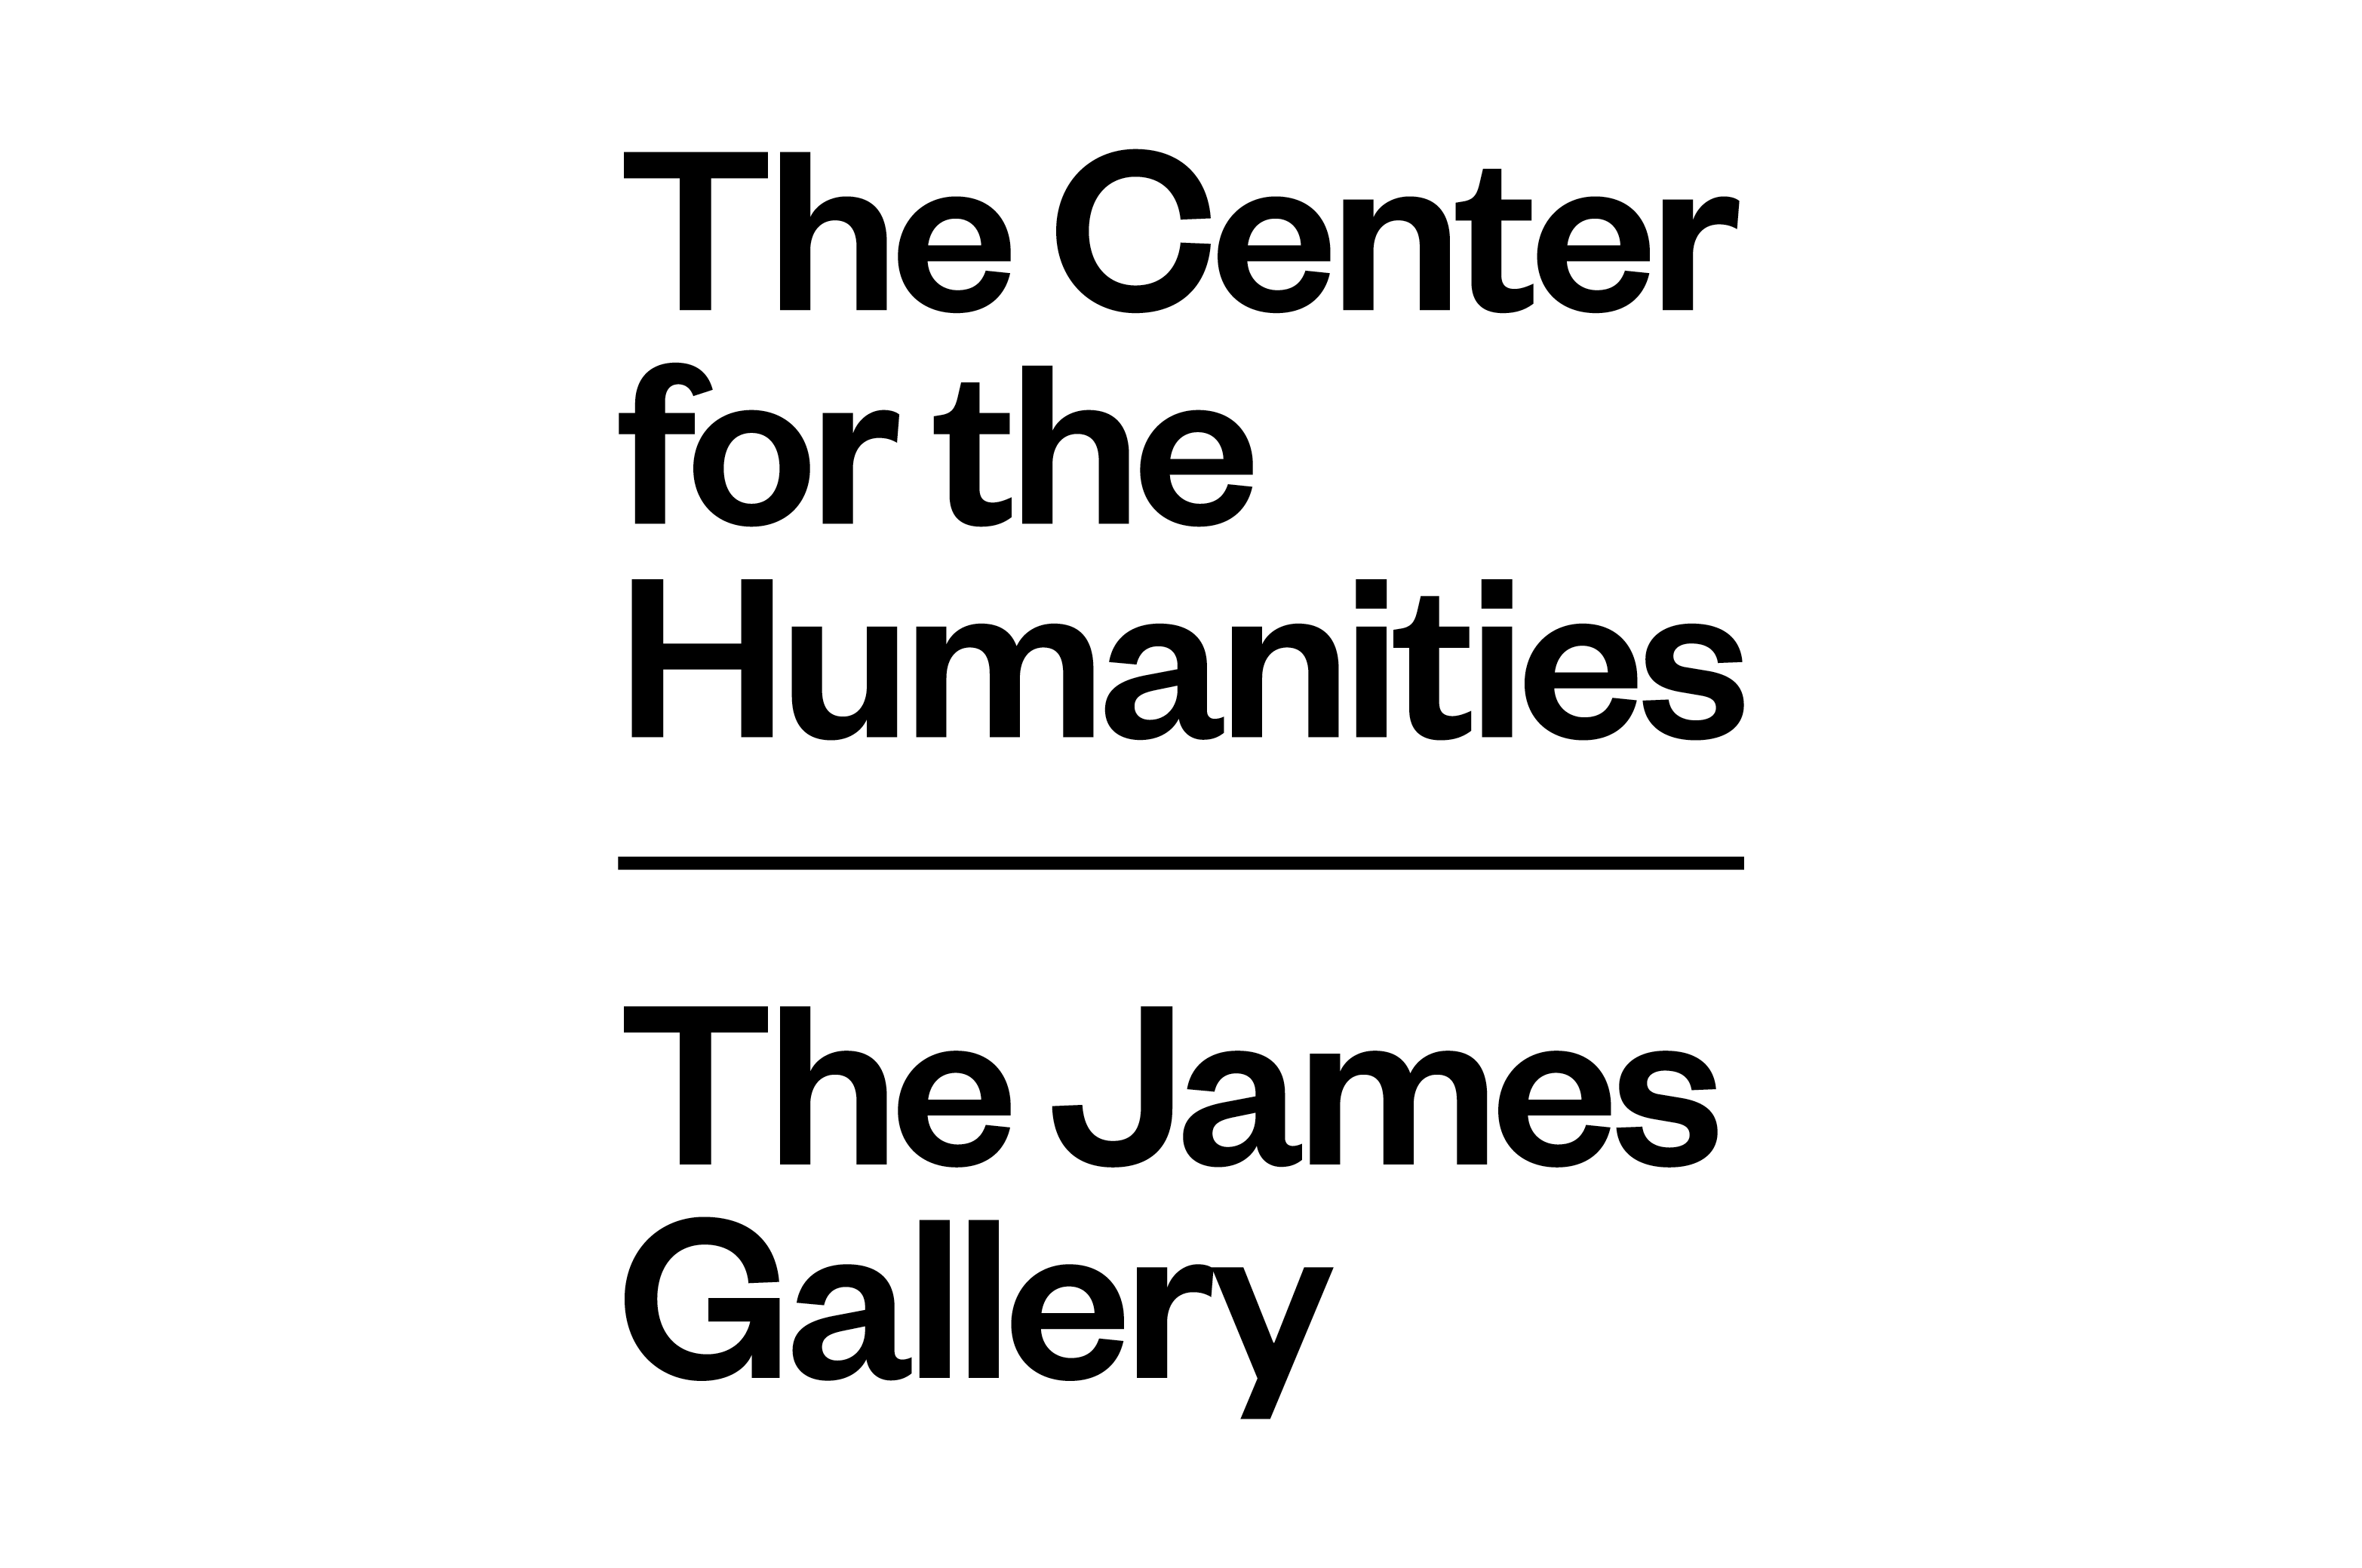 Center for the Humanities / The James Gallery - MTWTF